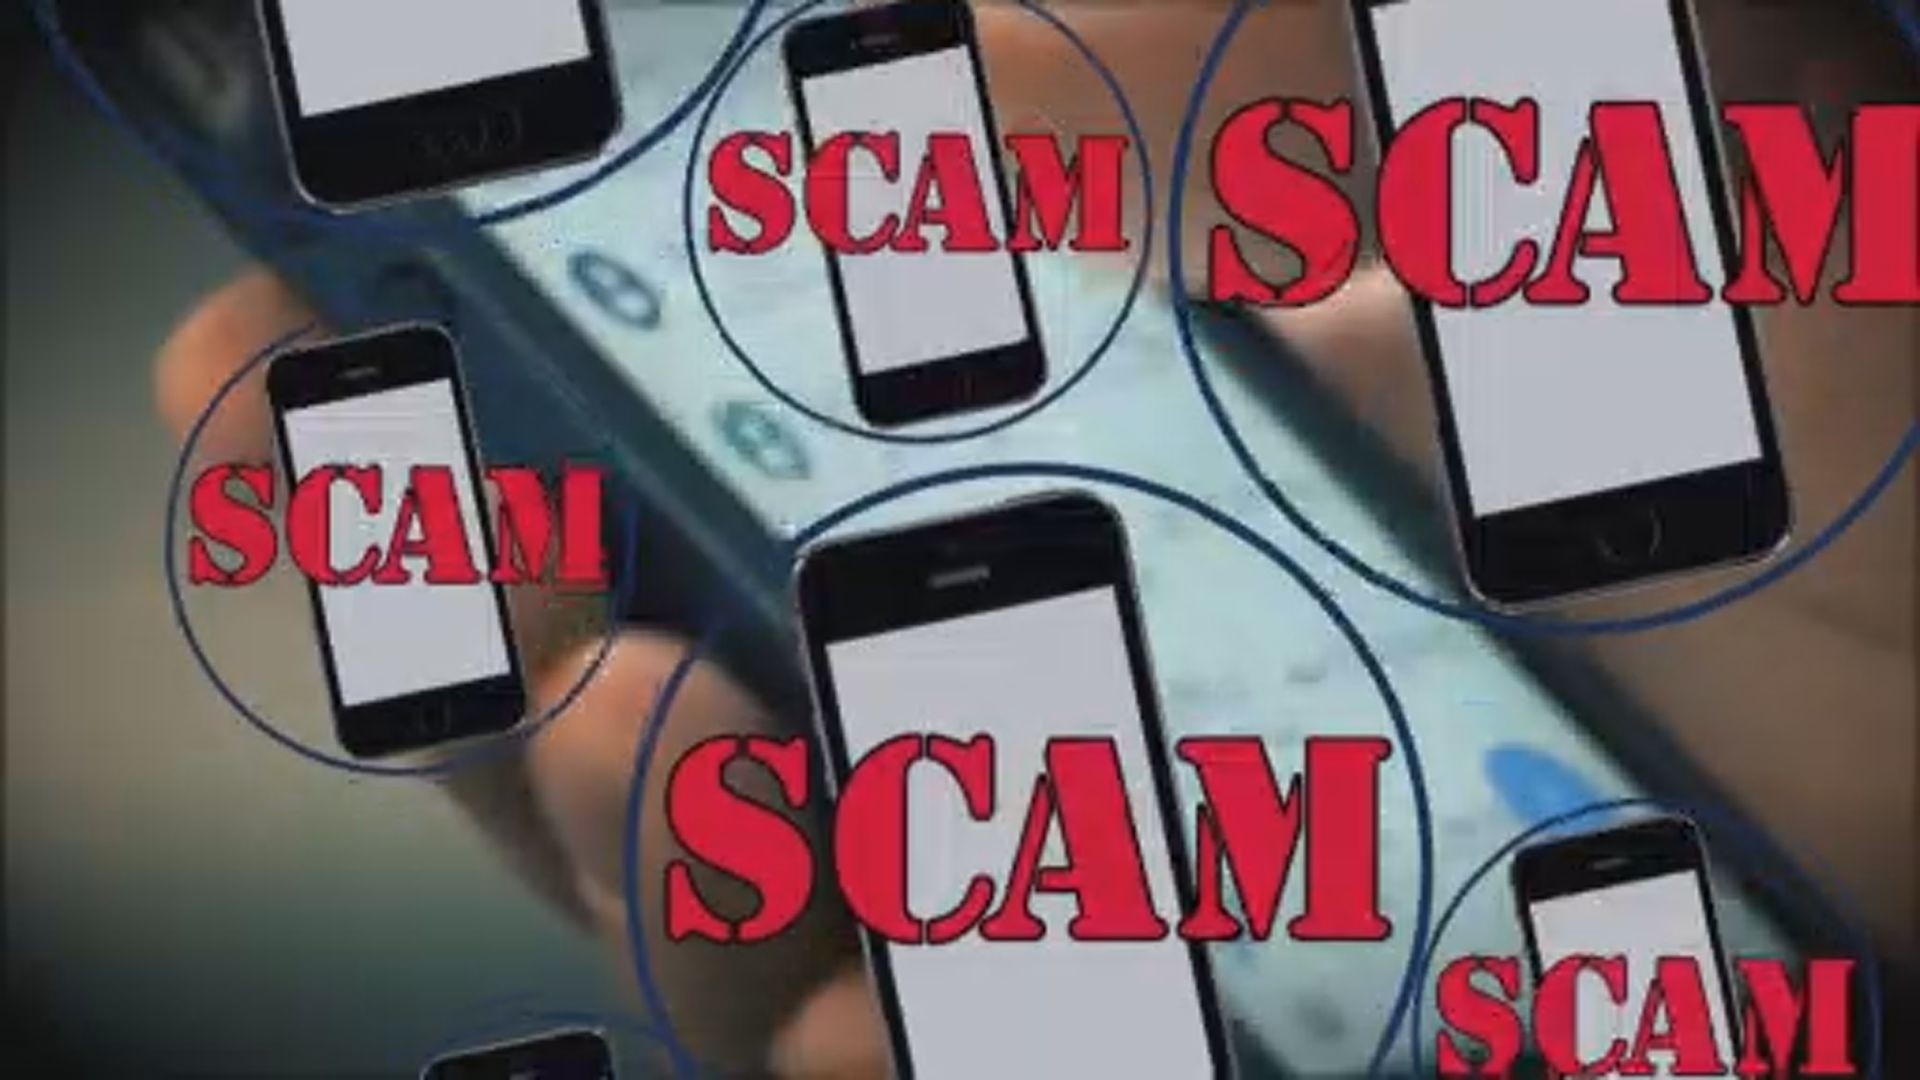 Scam Alert: Impersonating Law Enforcement, Doxxing and Swatting